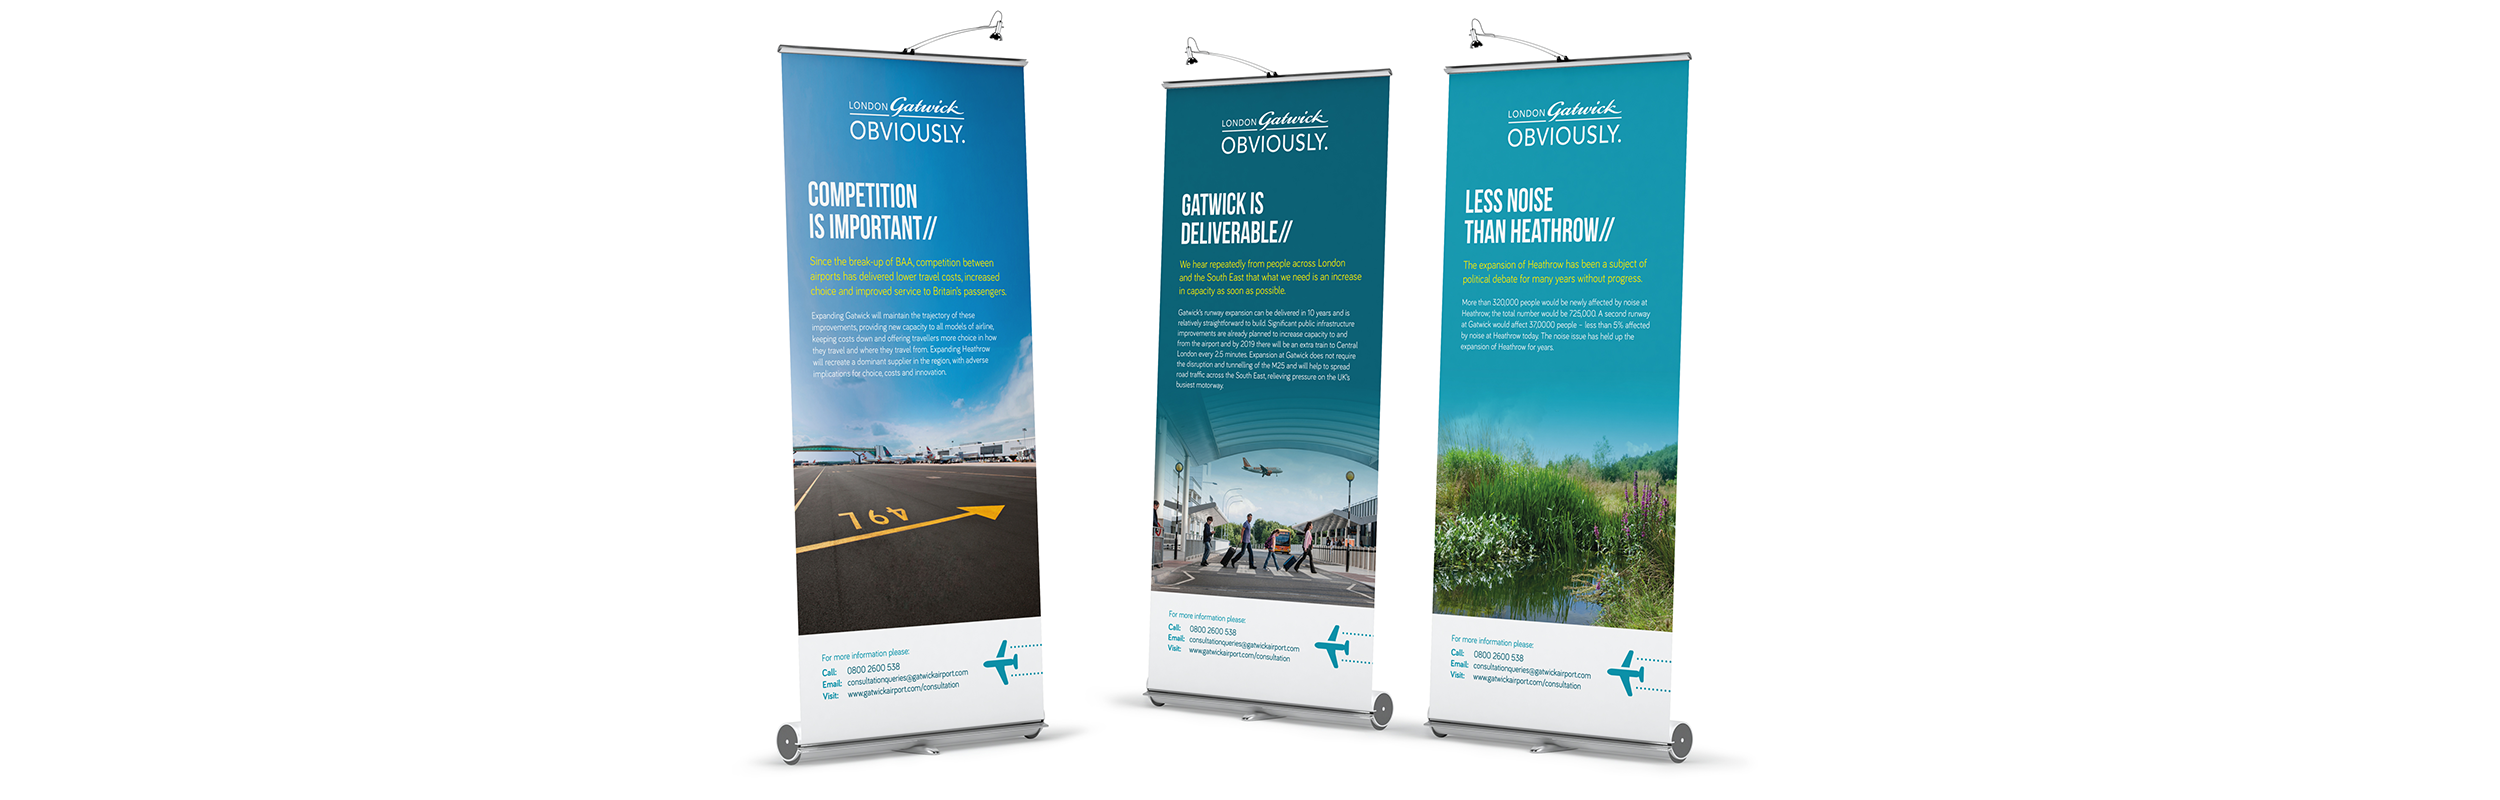 Gatwick pull-up banners